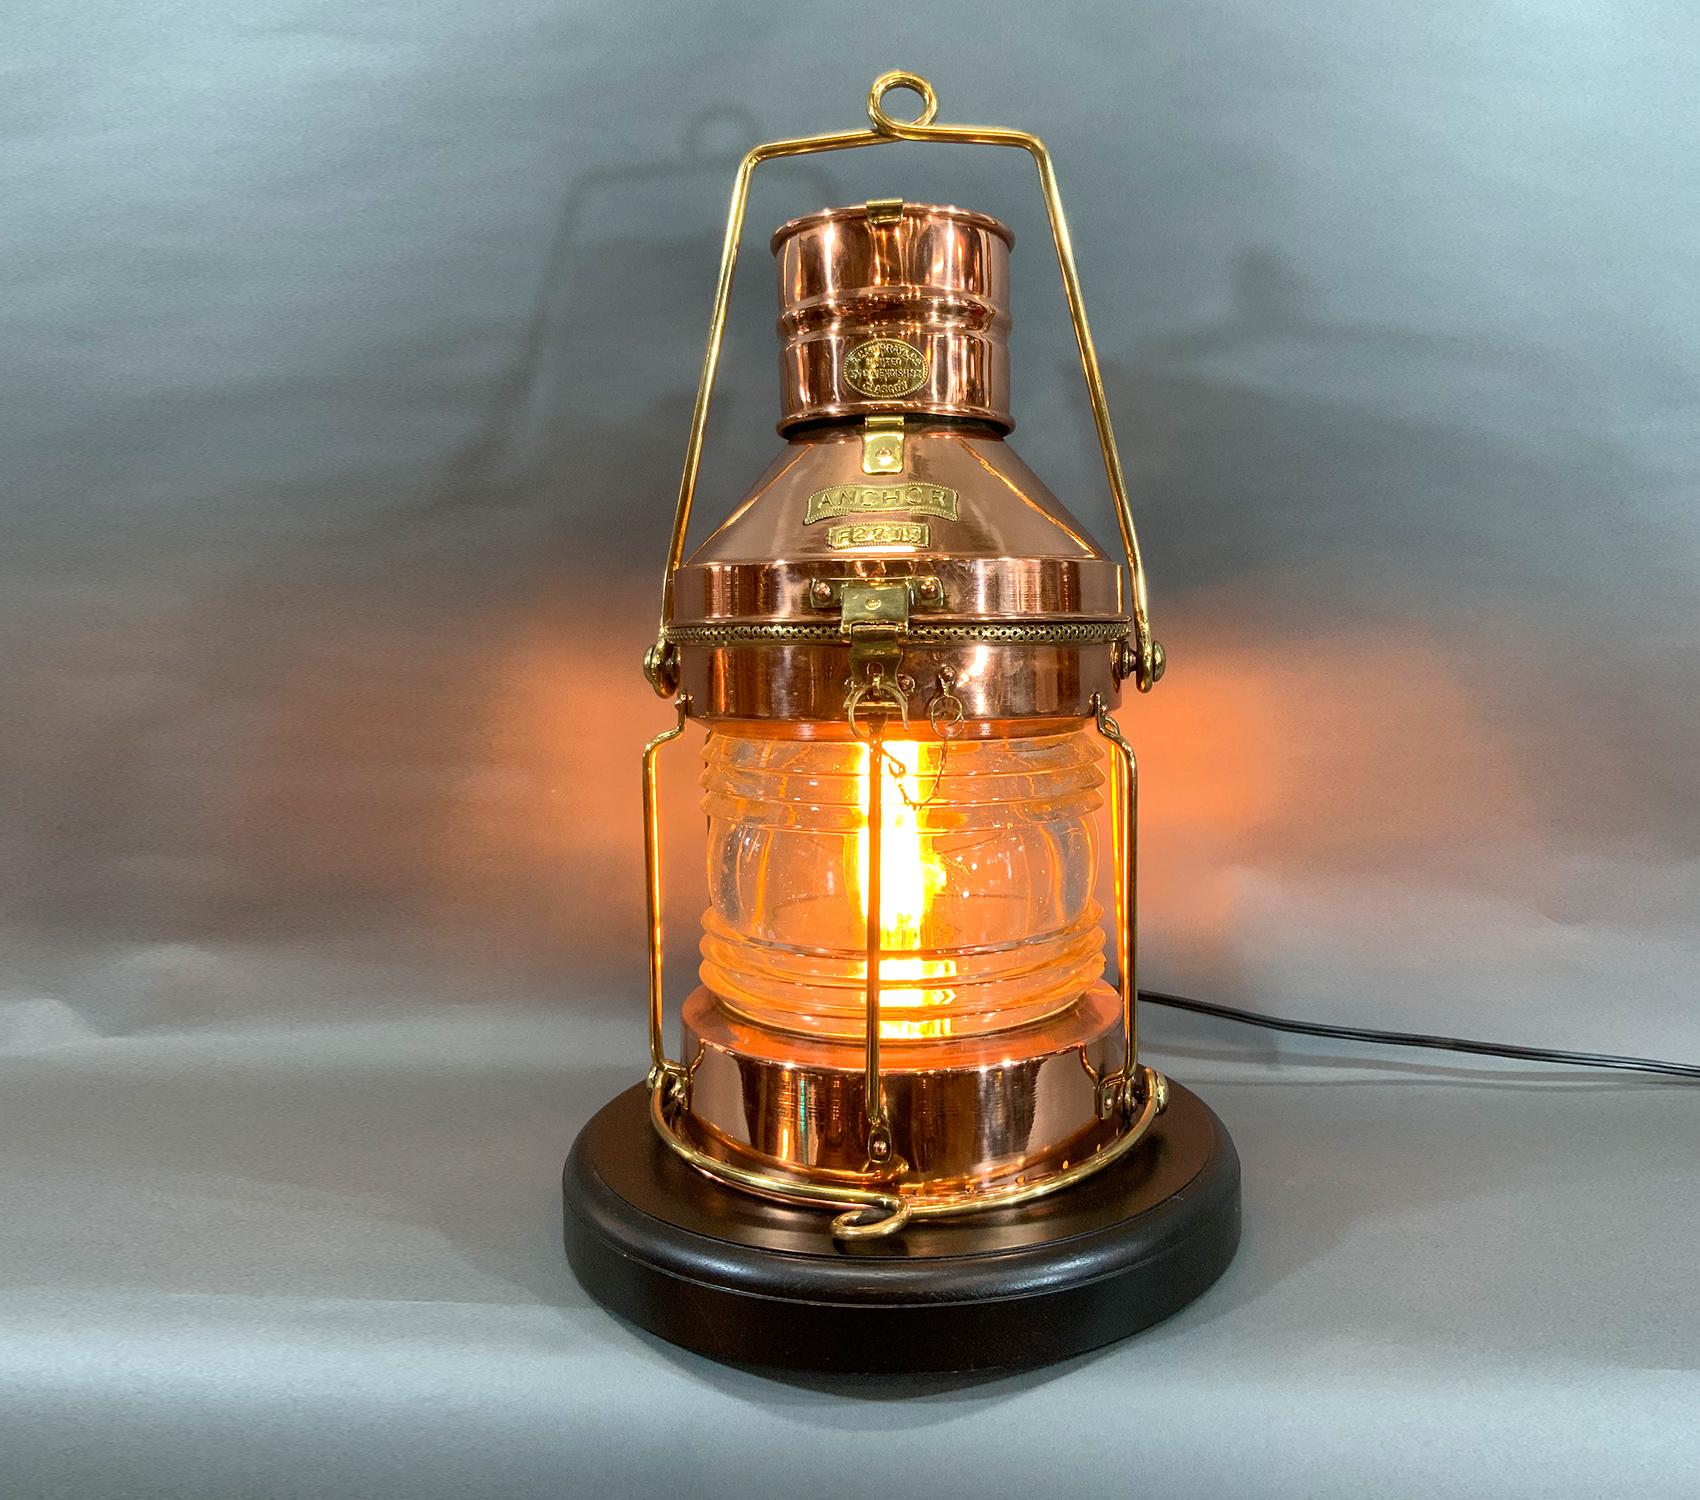 Antique highly polished solid copper ships lantern with brass trim. Hinged top. Brasses include hinges, hasp, hook, bars, handles, etc. Fitted to a varnished mahogany base. Wired with electric for home use. With brass badge from Chandler. The very